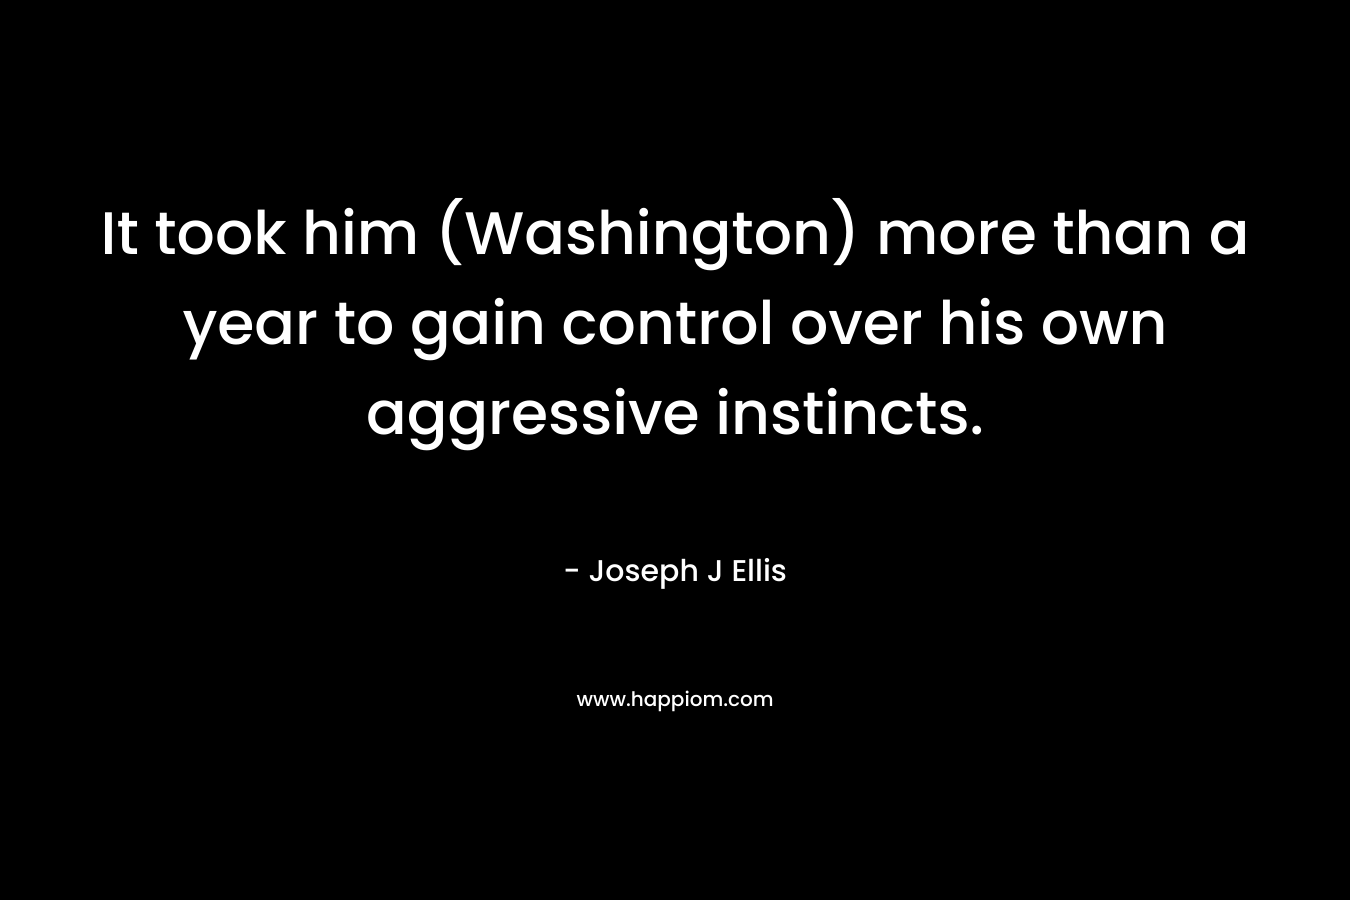 It took him (Washington) more than a year to gain control over his own aggressive instincts.